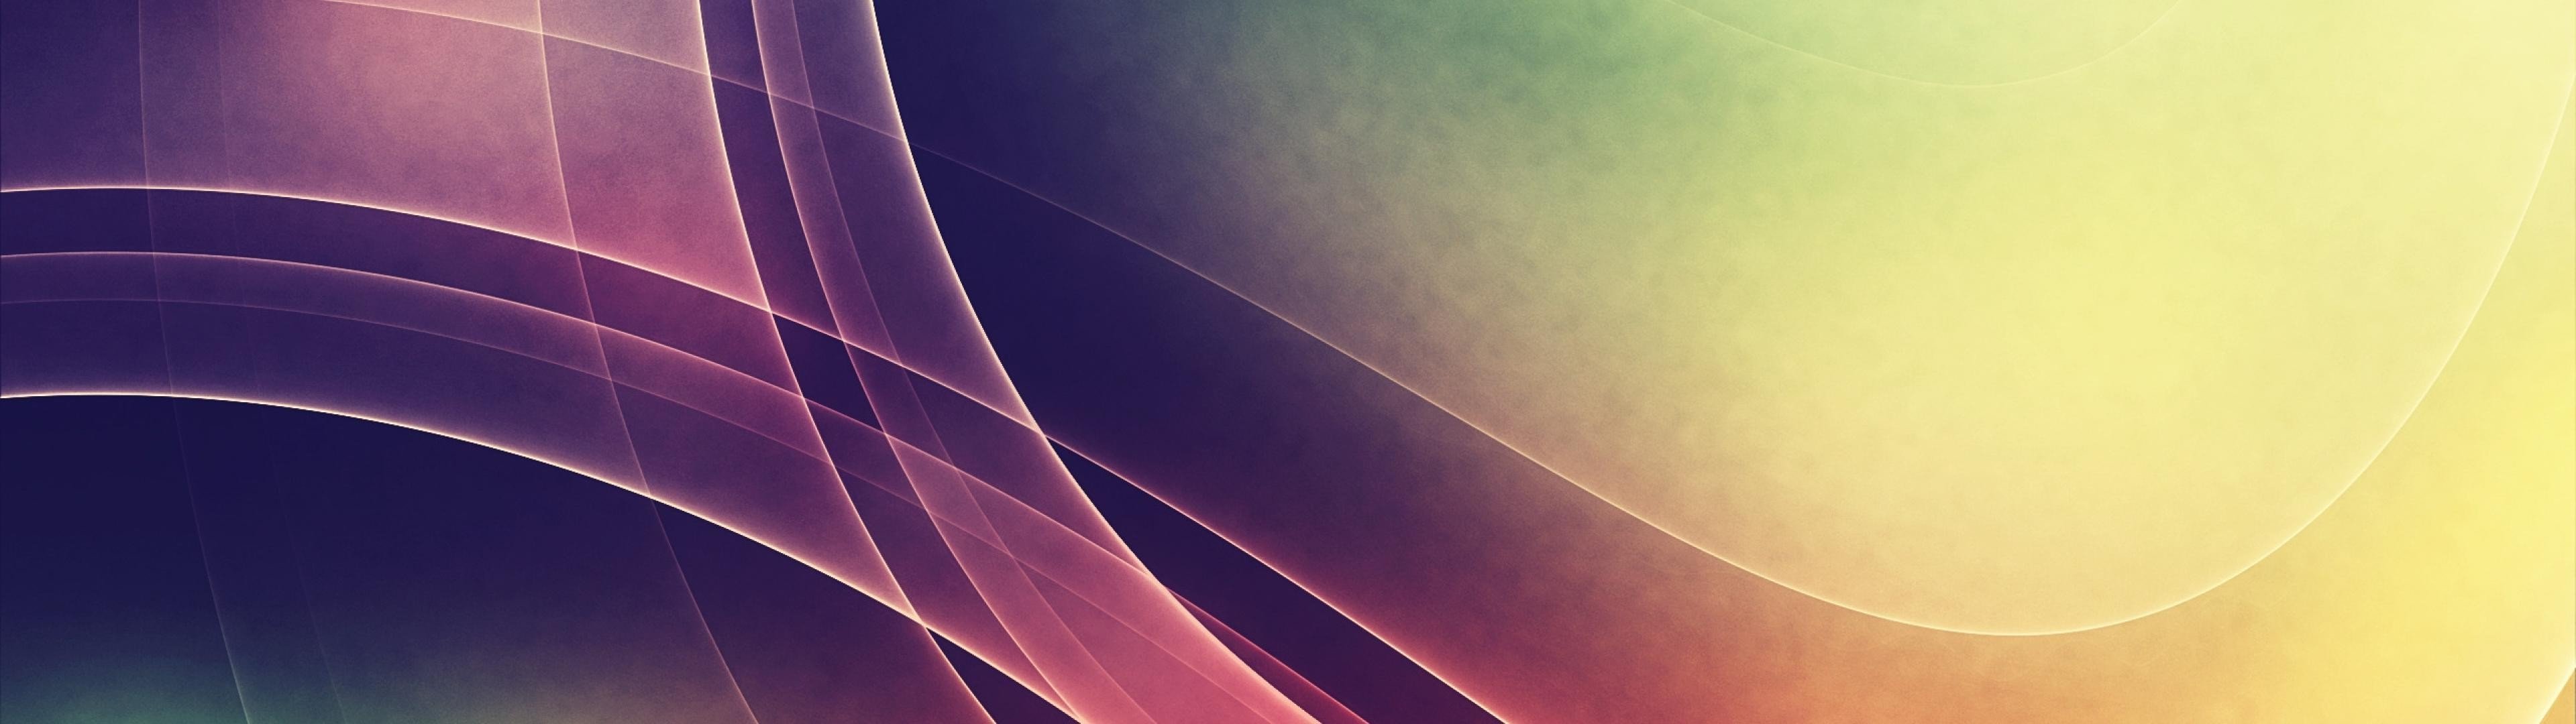 Wallpaper, sunlight, digital art, abstract, reflection, sky, circle, multiple display, light, color, wave, shape, line, wing, screenshot, 3840x1080 px, computer wallpaper, atmosphere of earth 3840x1080